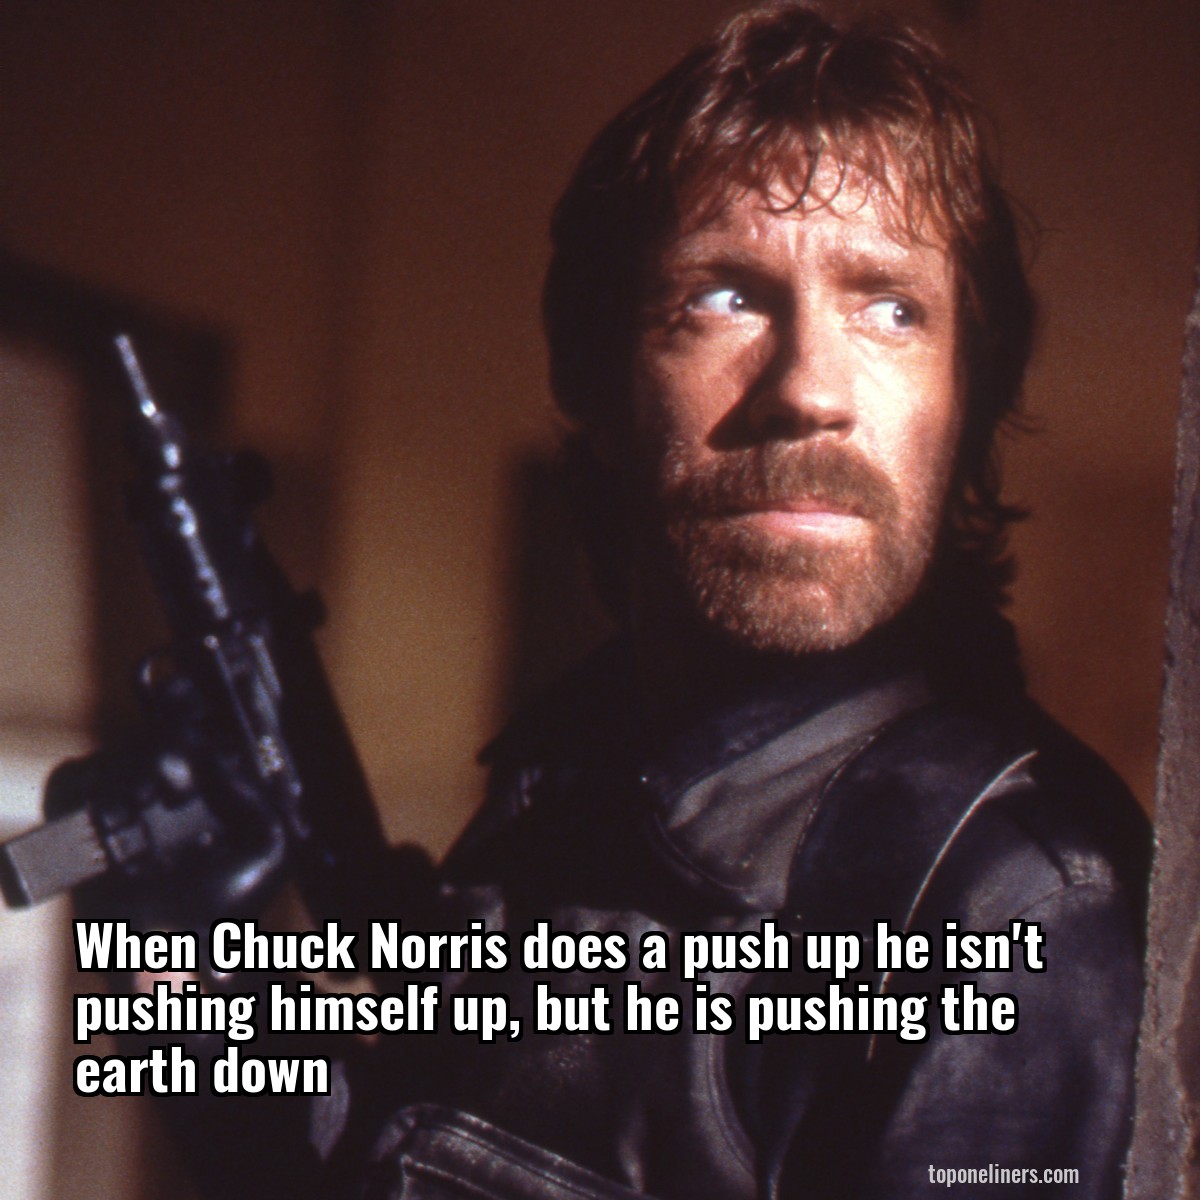 When Chuck Norris does a push up he isn't pushing himself up, but he is pushing the earth down